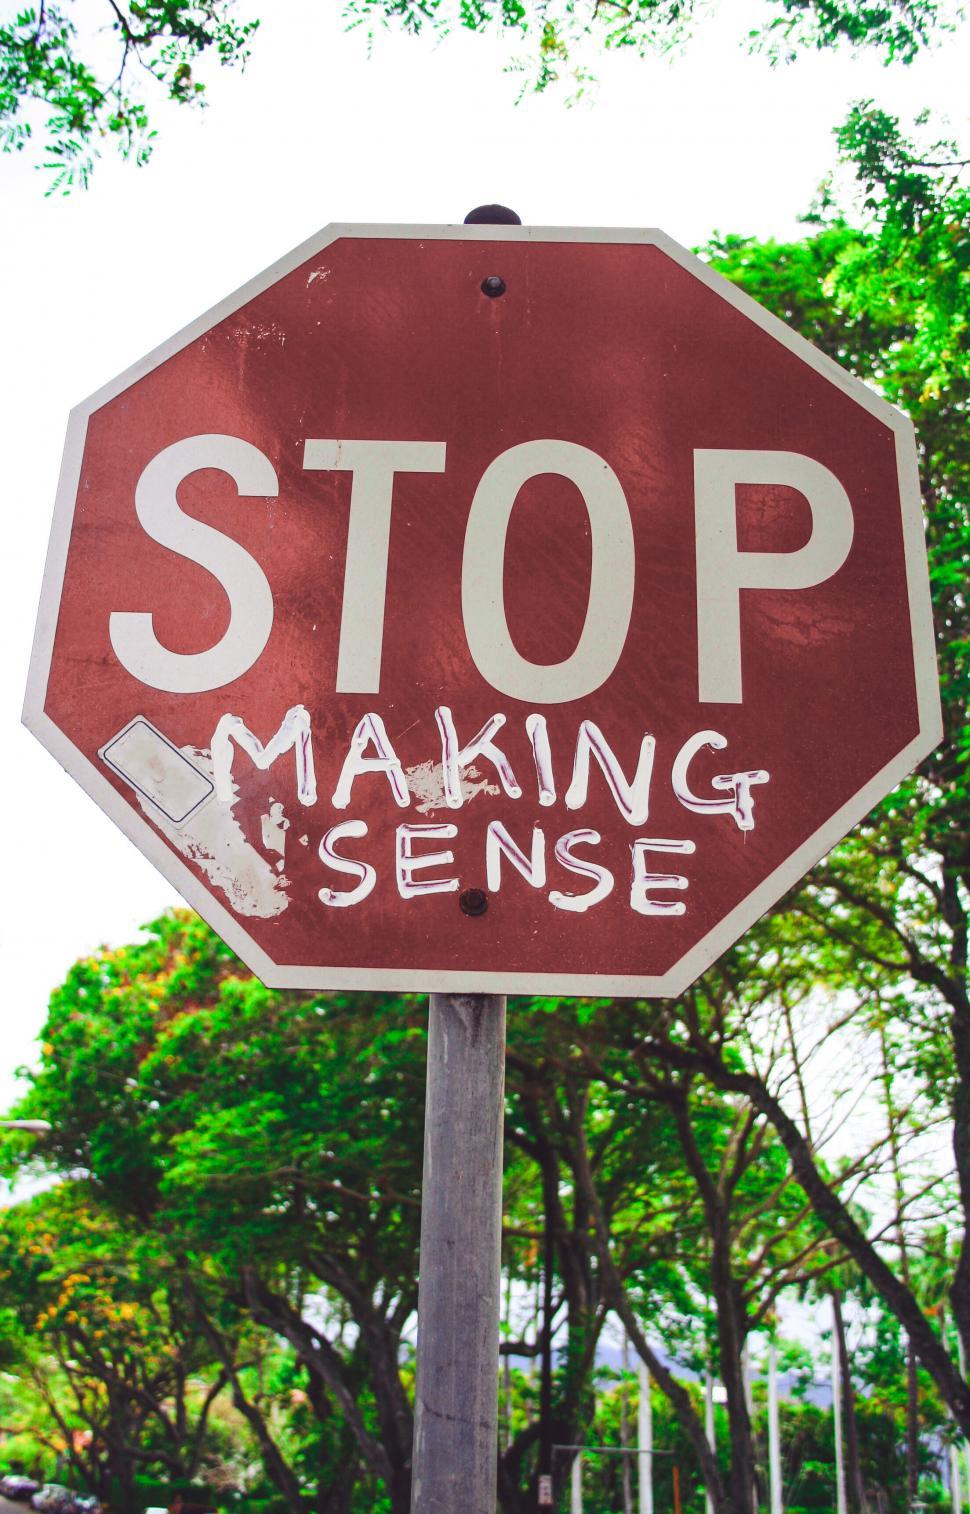 Free Image of Altered stop sign with quirky message 